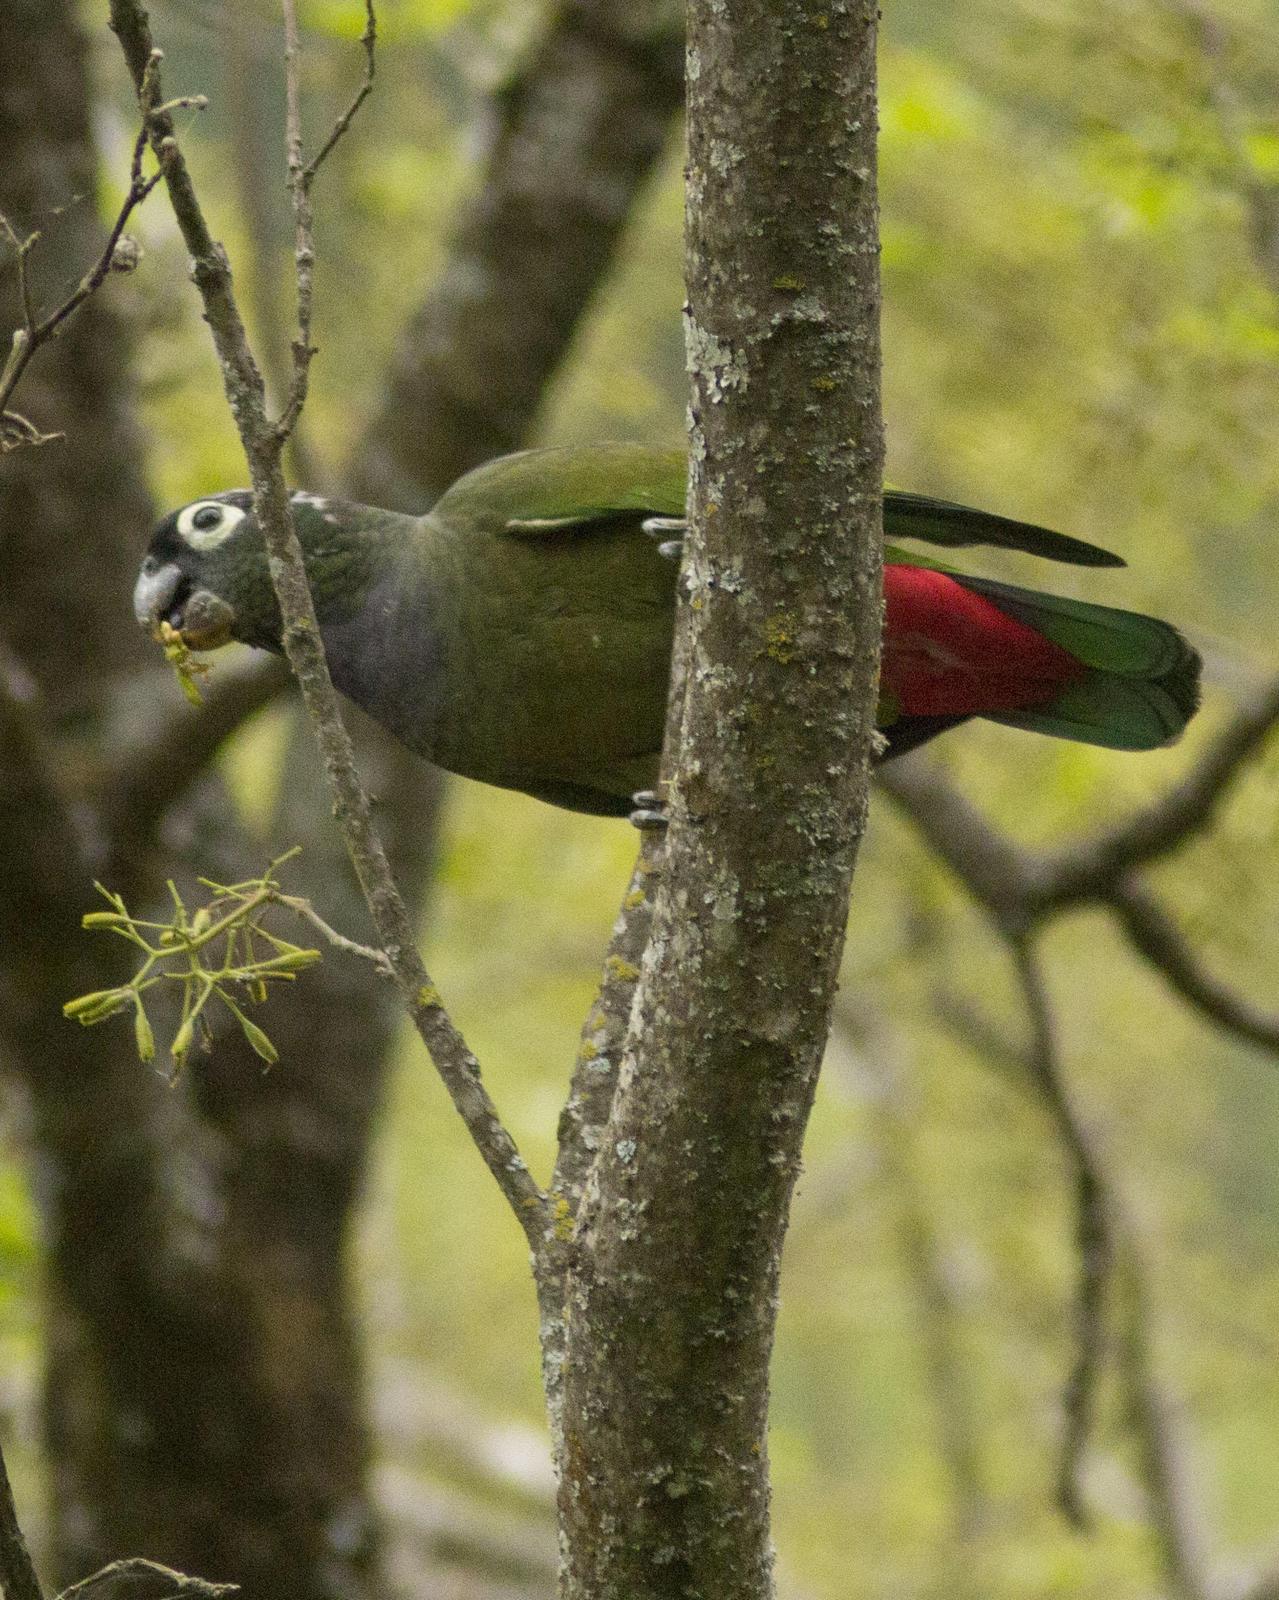 Scaly-headed Parrot Photo by Lee Harding